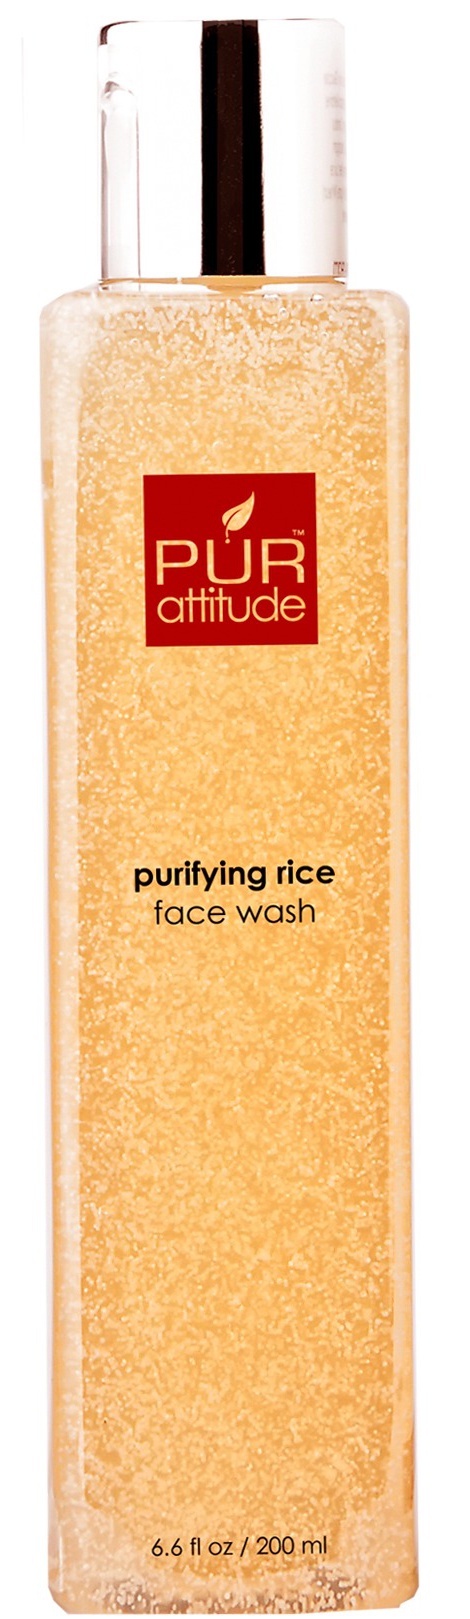 PUR attitude Purifying Rice Face Wash